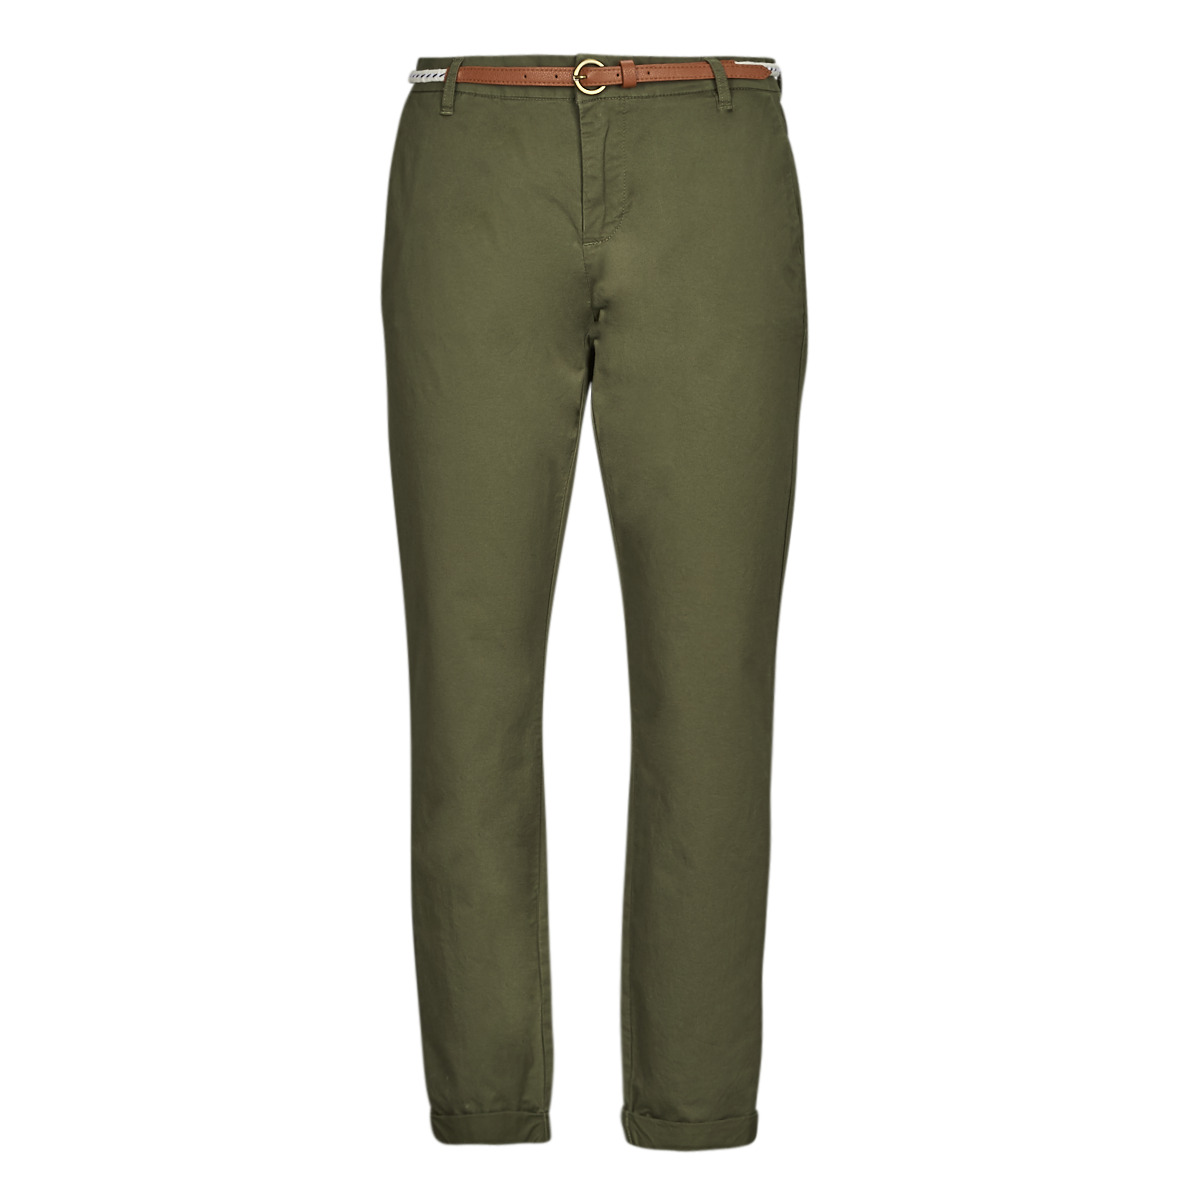 | NET COTTON CHINO PNT Only Free ! ONLBIANA Clothing CC BELT delivery Spartoo chinos - Kaki - Women